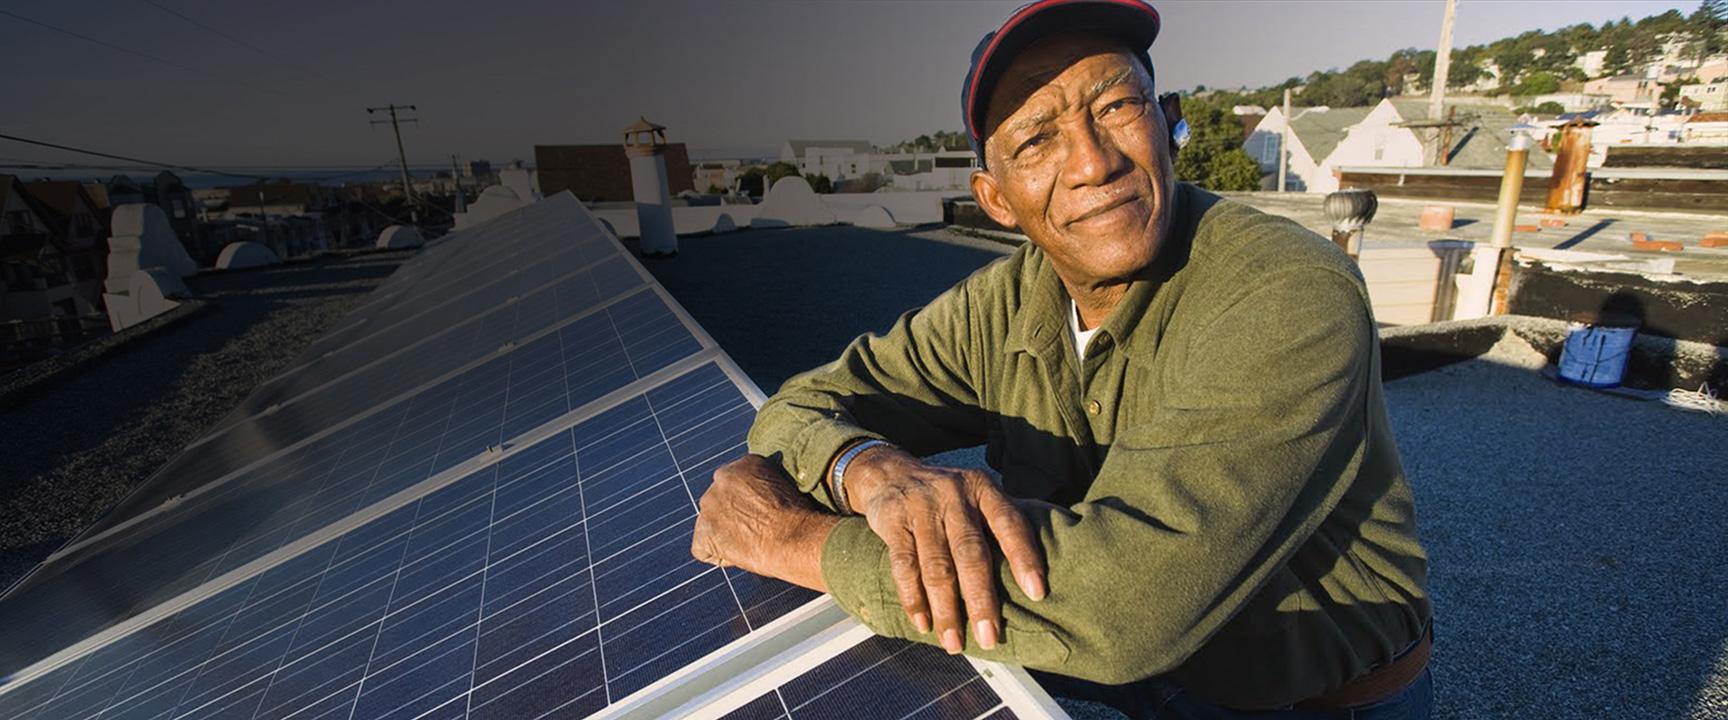 Man on roof leaning on solar panels